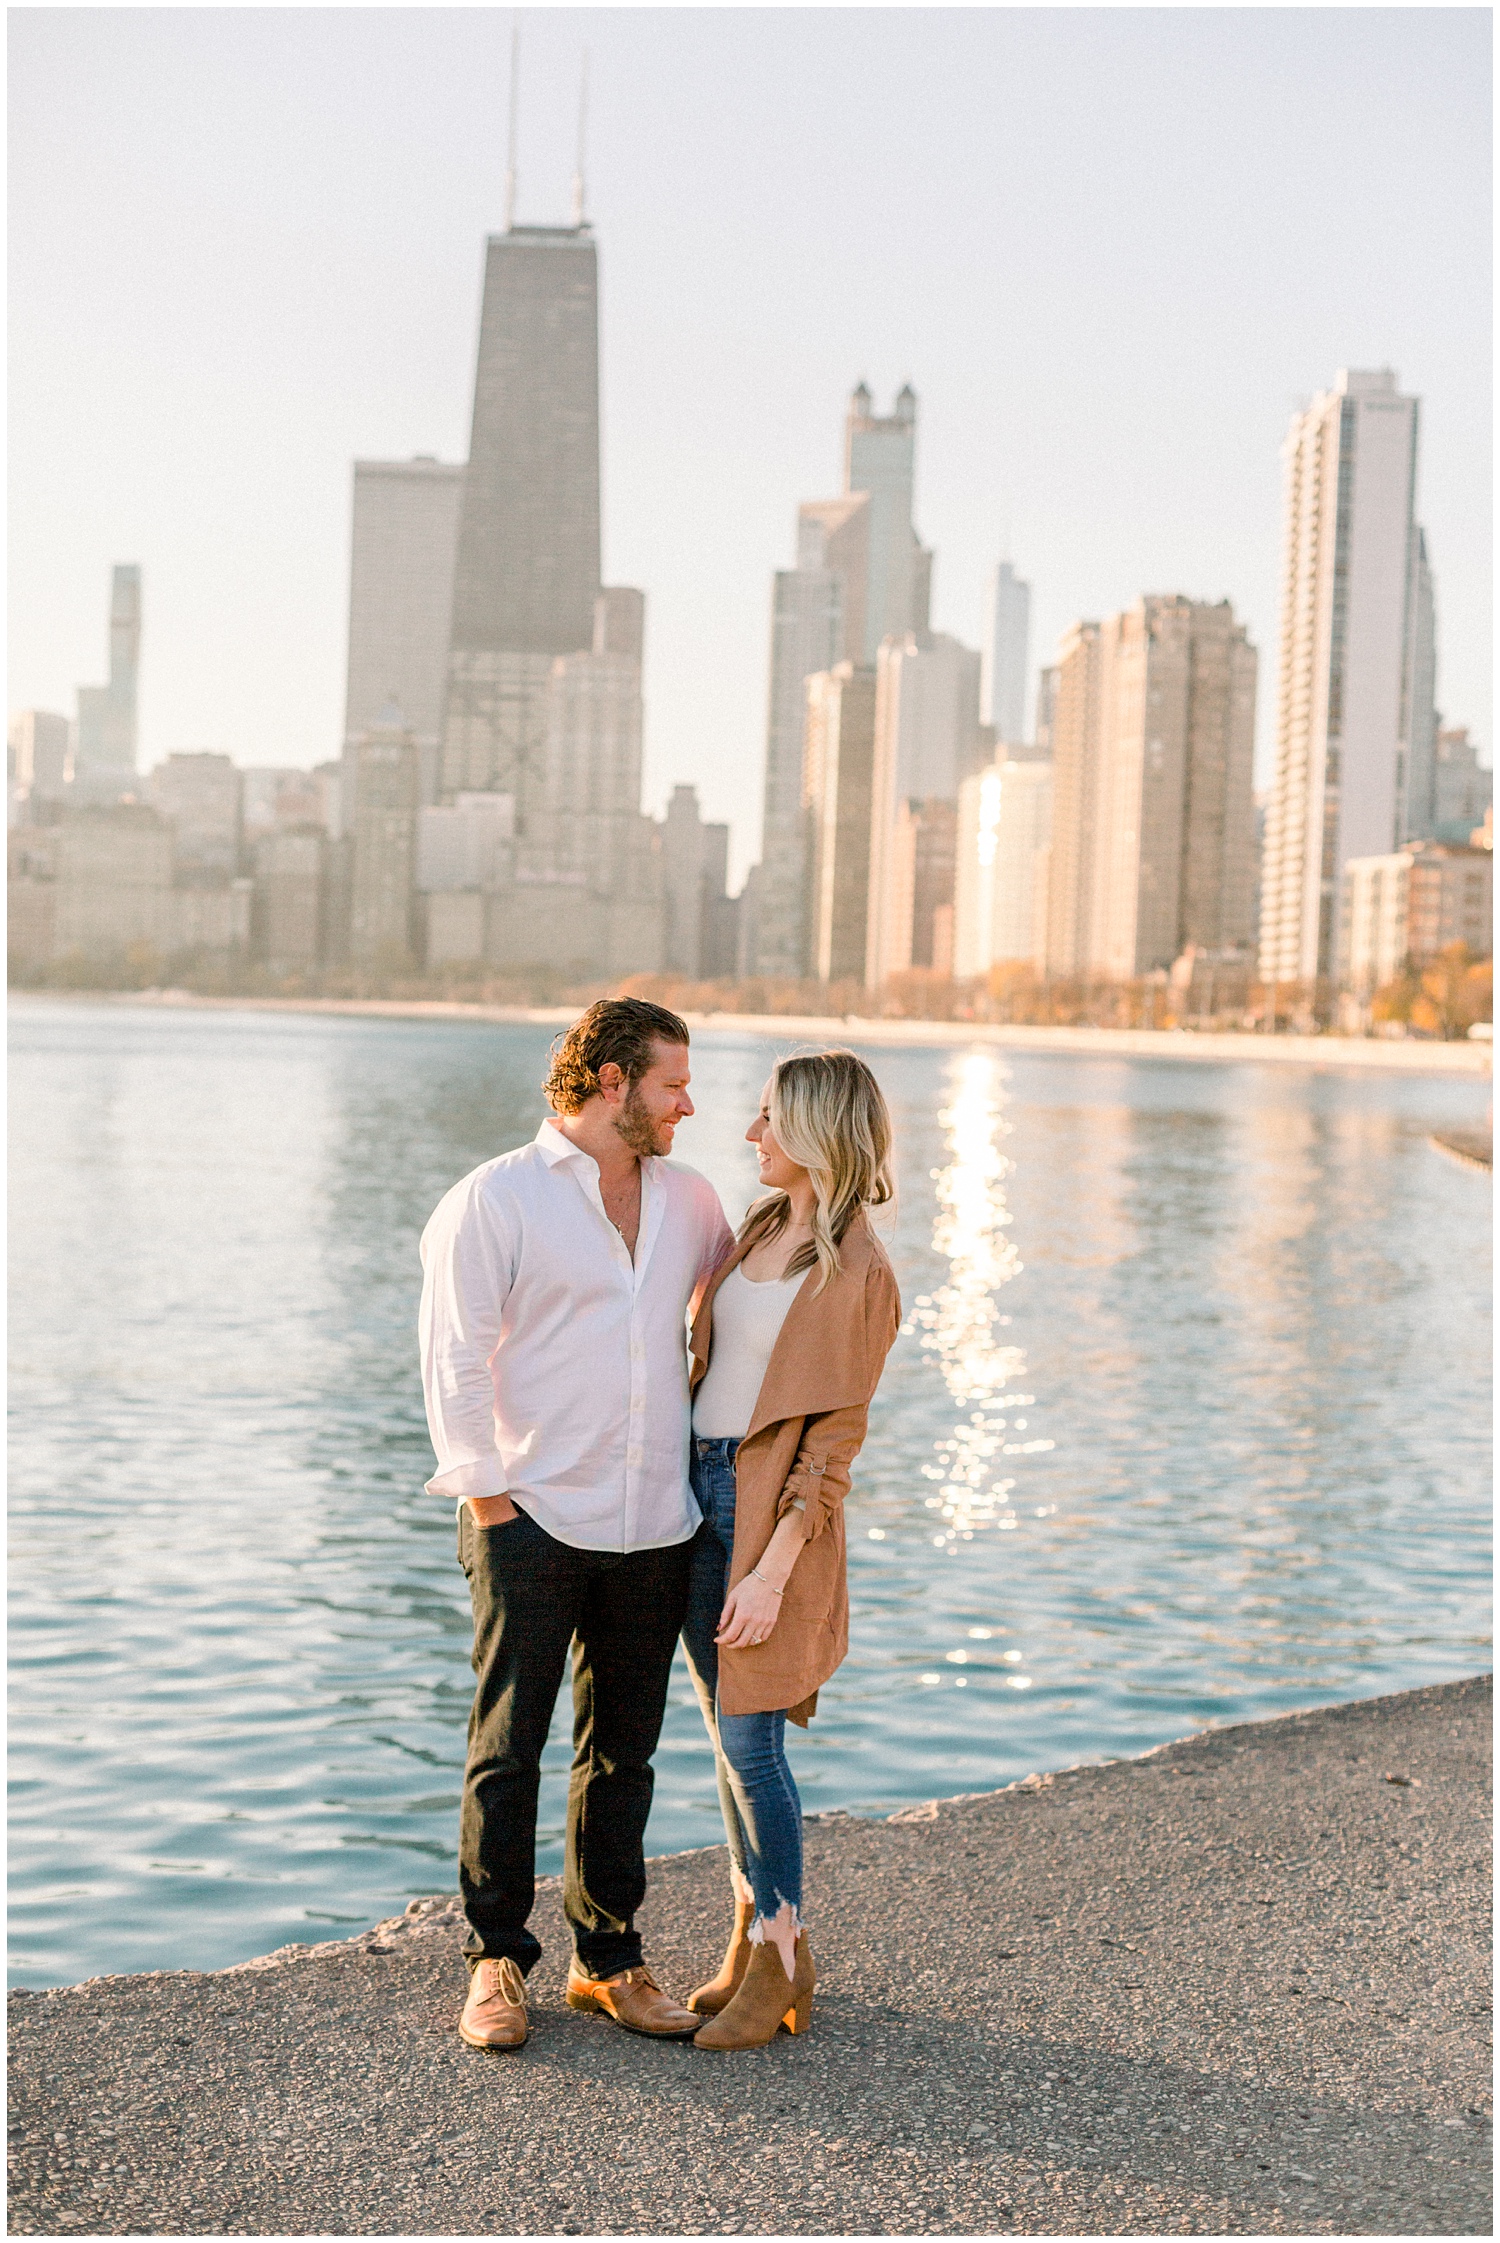 The Best Chicago Engagement Photo Locations